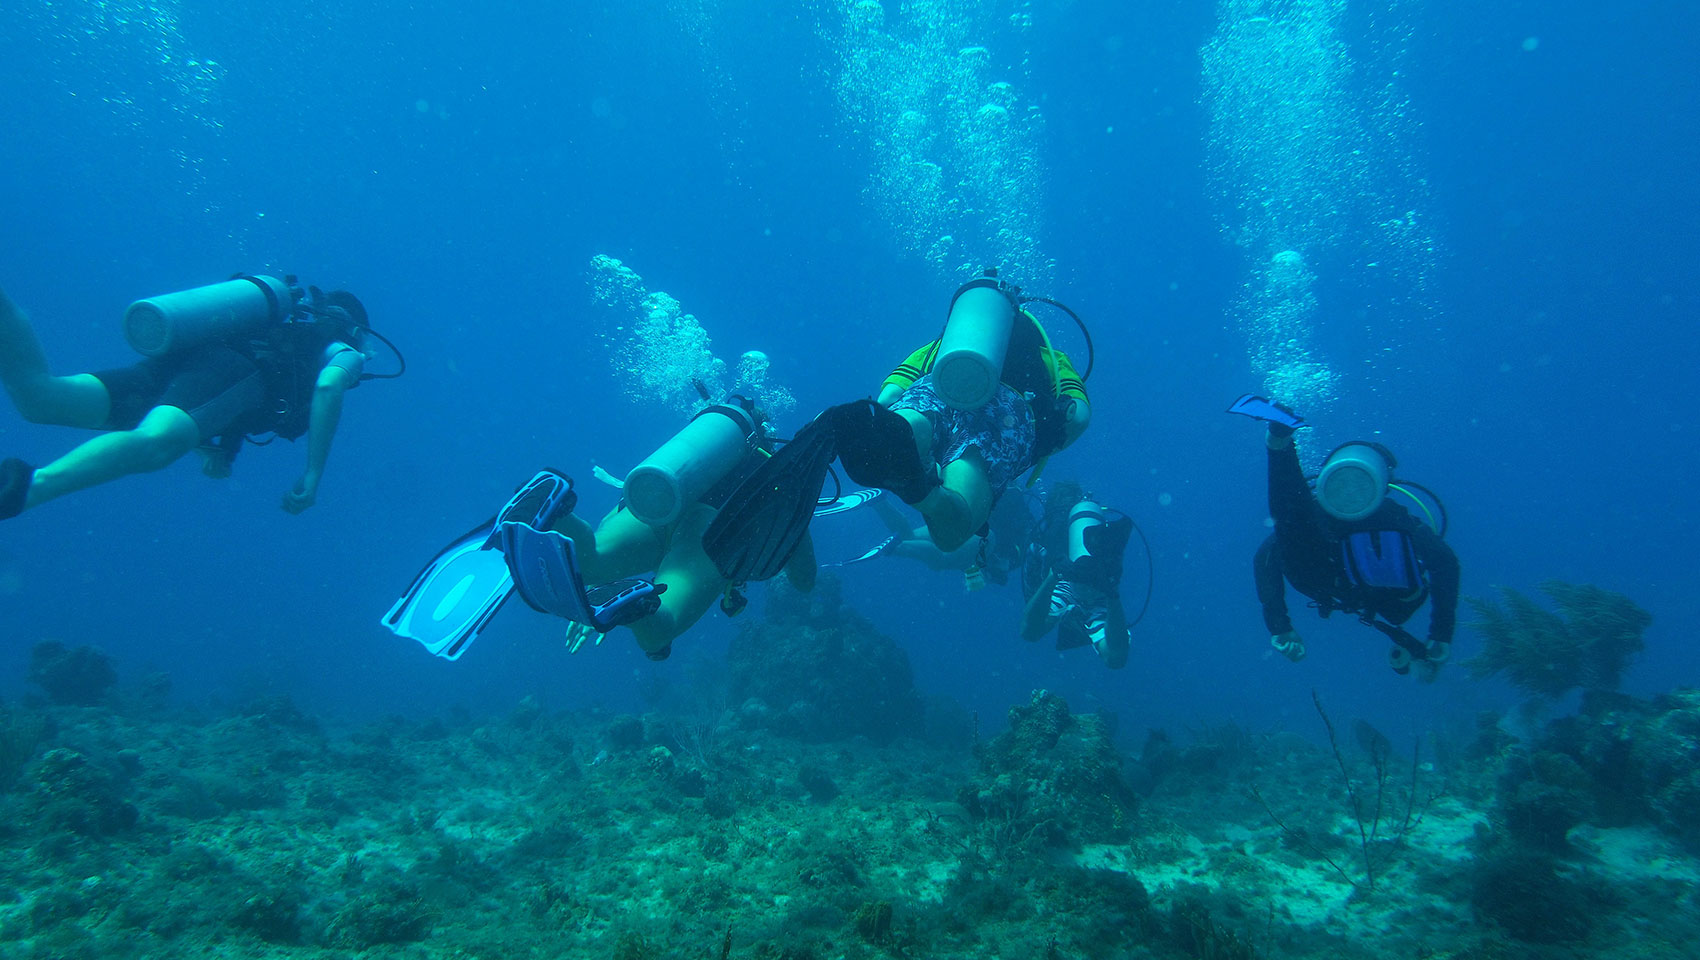 Seafire Guardians scuba diving to support the local coral reef in Grand Cayman.